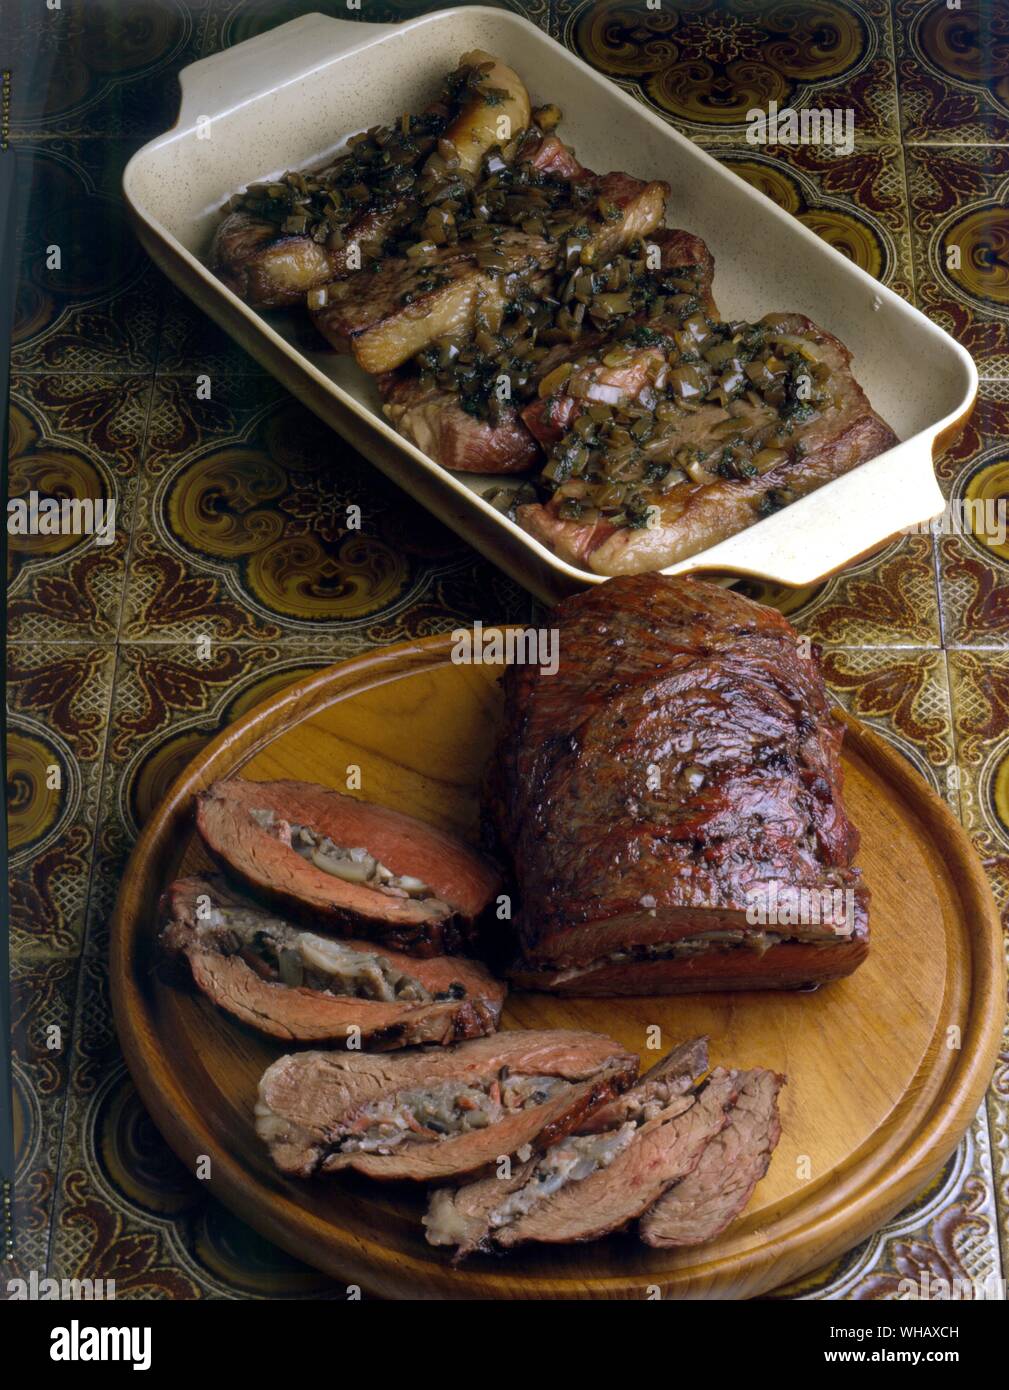 Grilled Rumpsteak with shallot butter Stock Photo